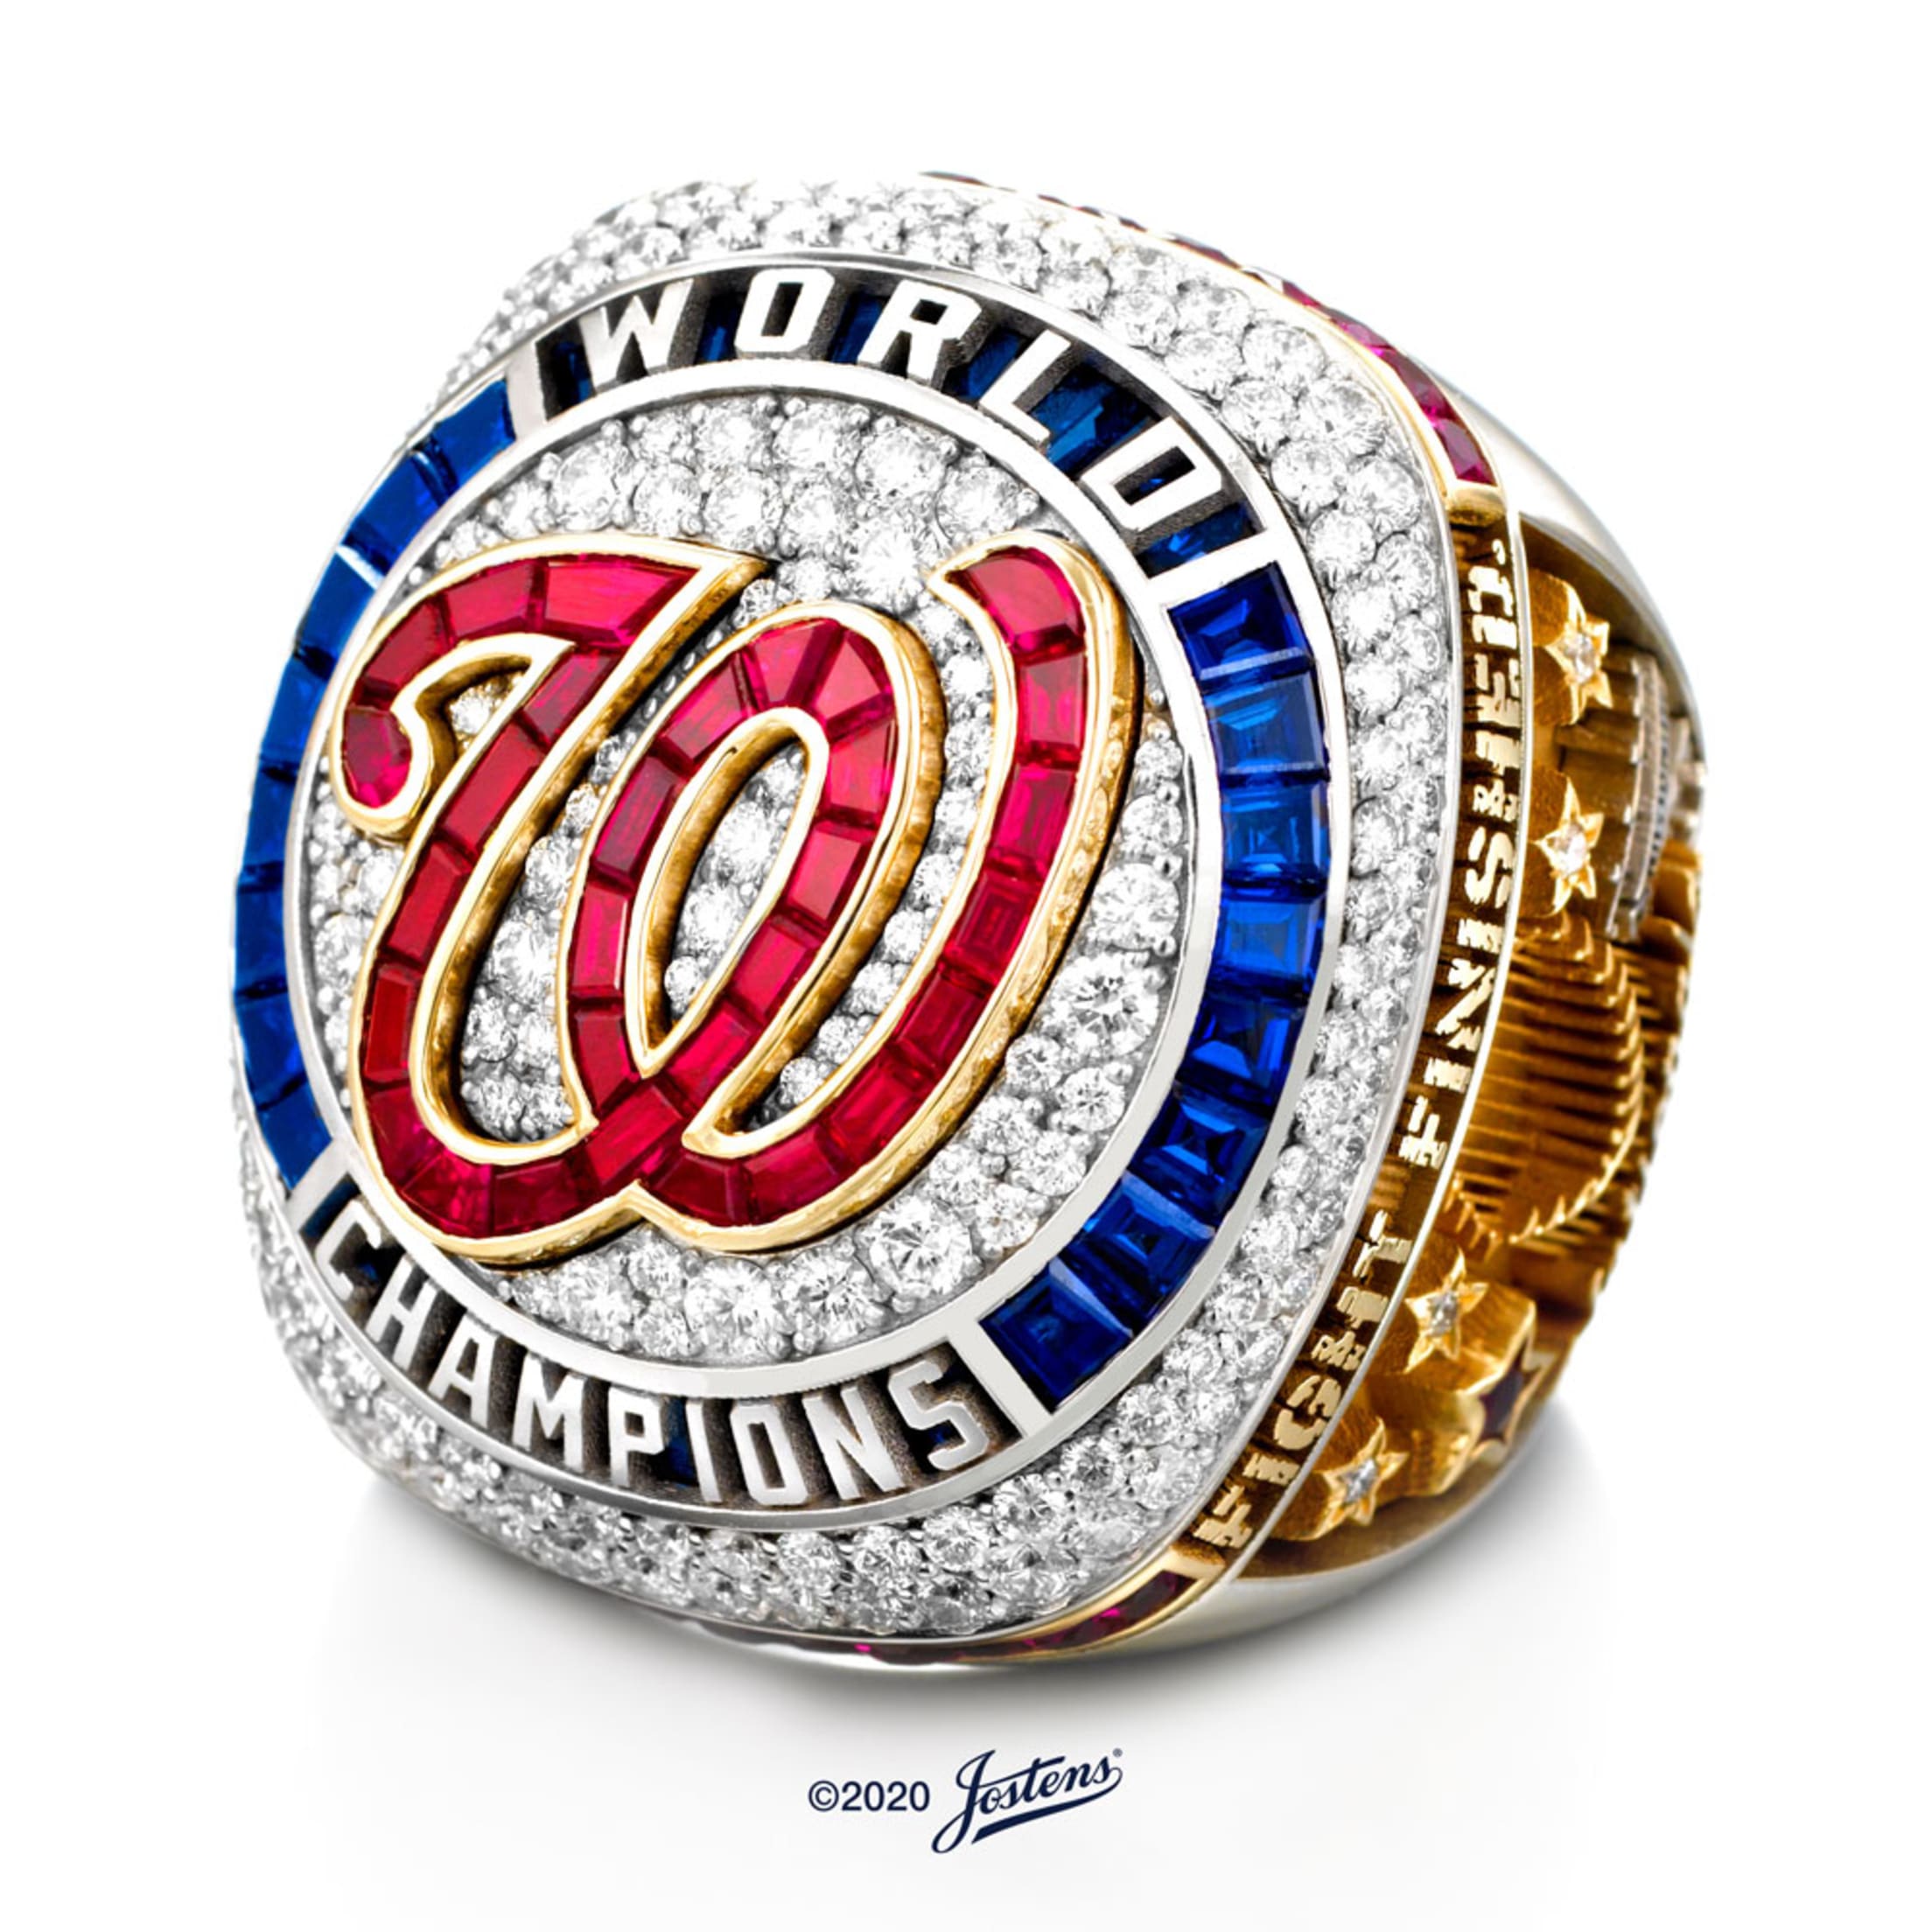 Nationals Team Store (@natsteamstore) • Instagram photos and videos